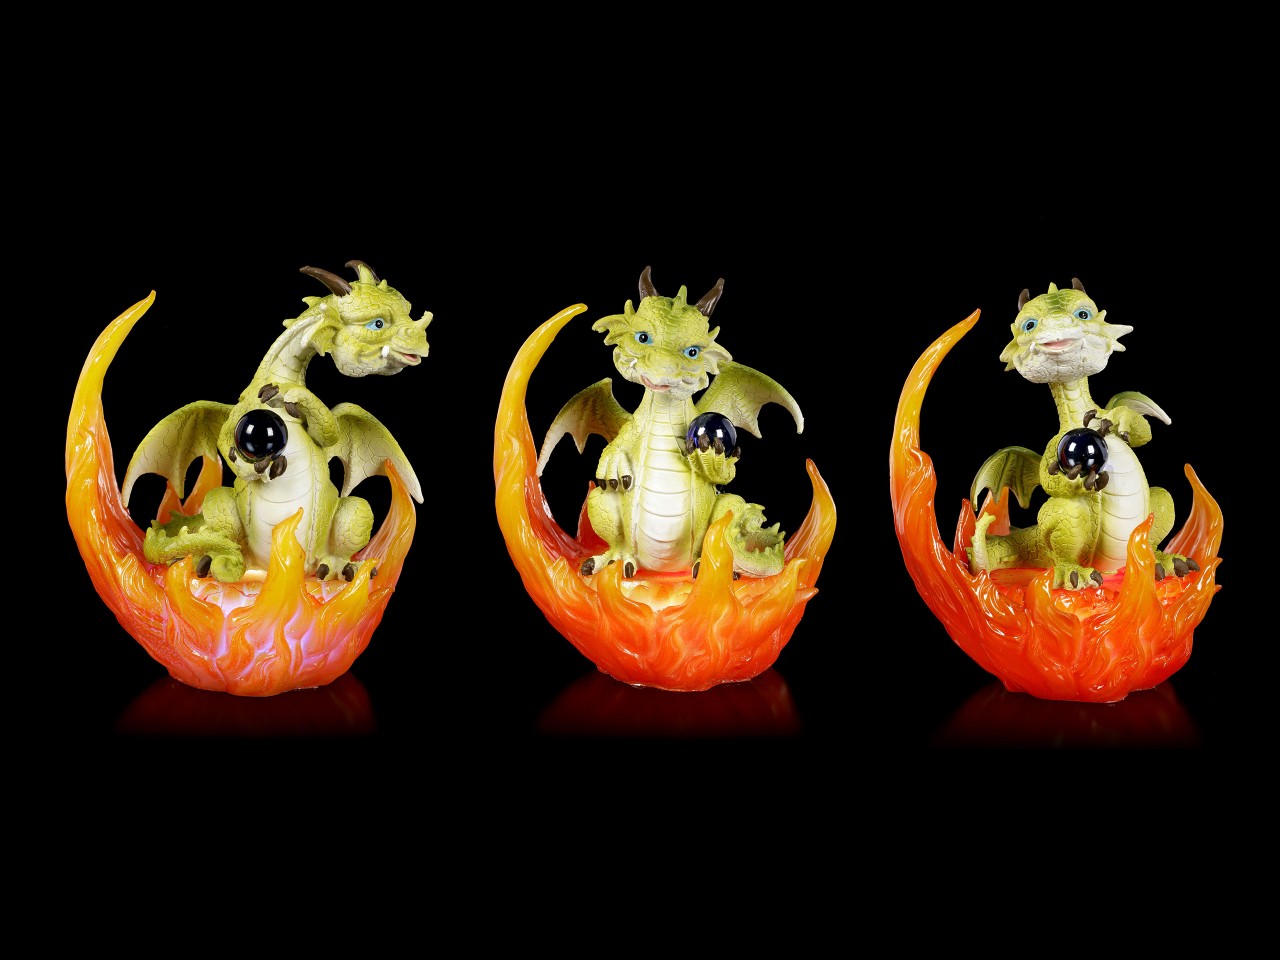 Dragon Figurines in Fire LED - Set of 3